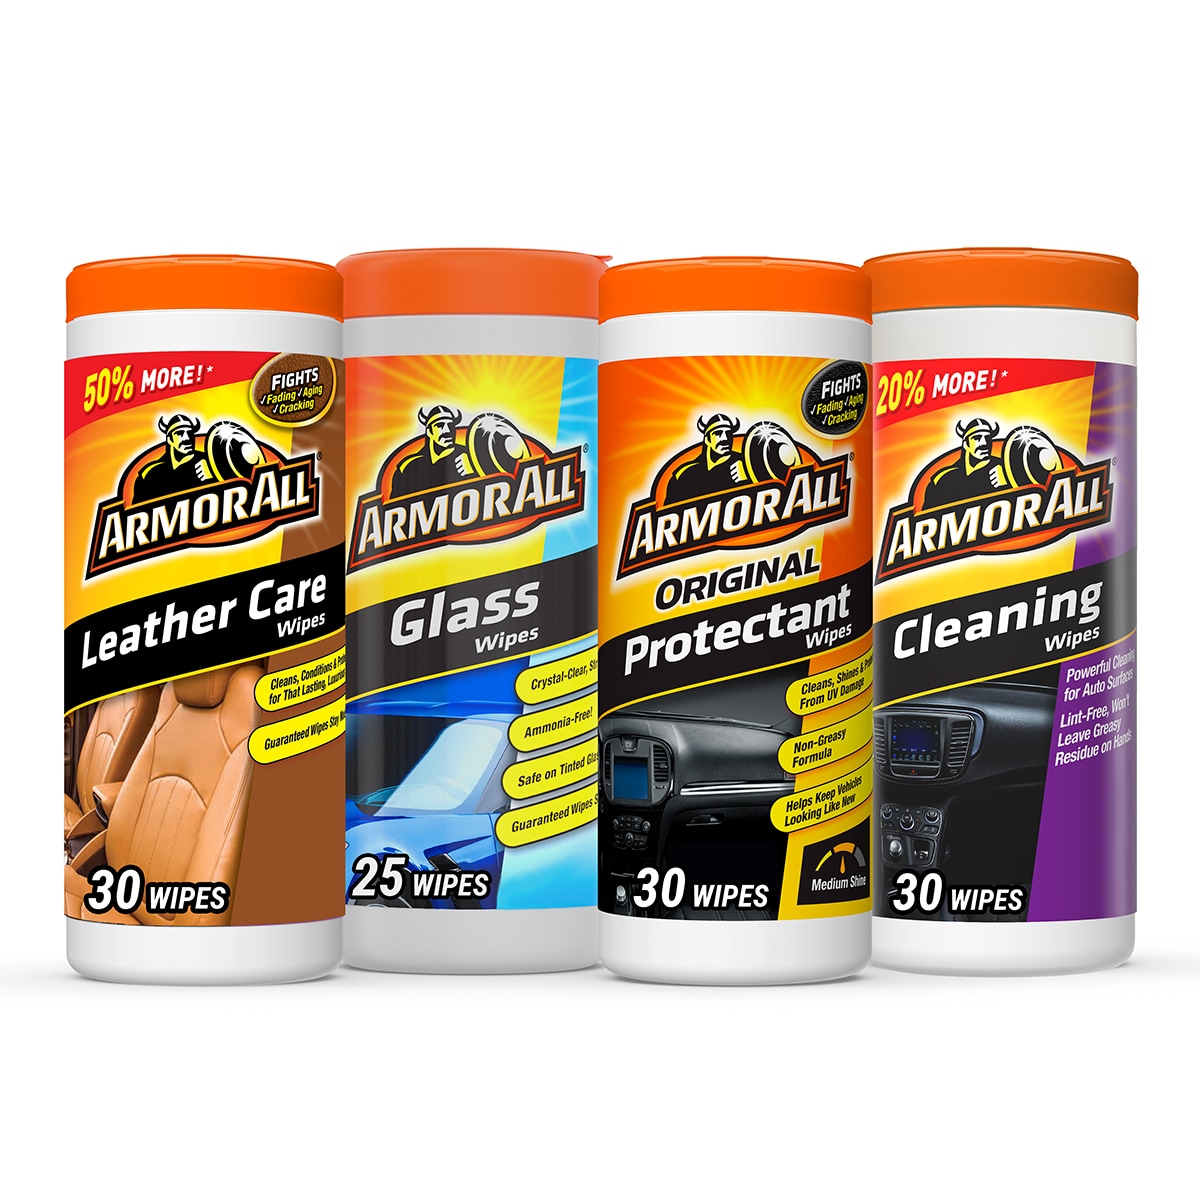  Armor All Car Interior Cleaner Glass Wipes for Dirt